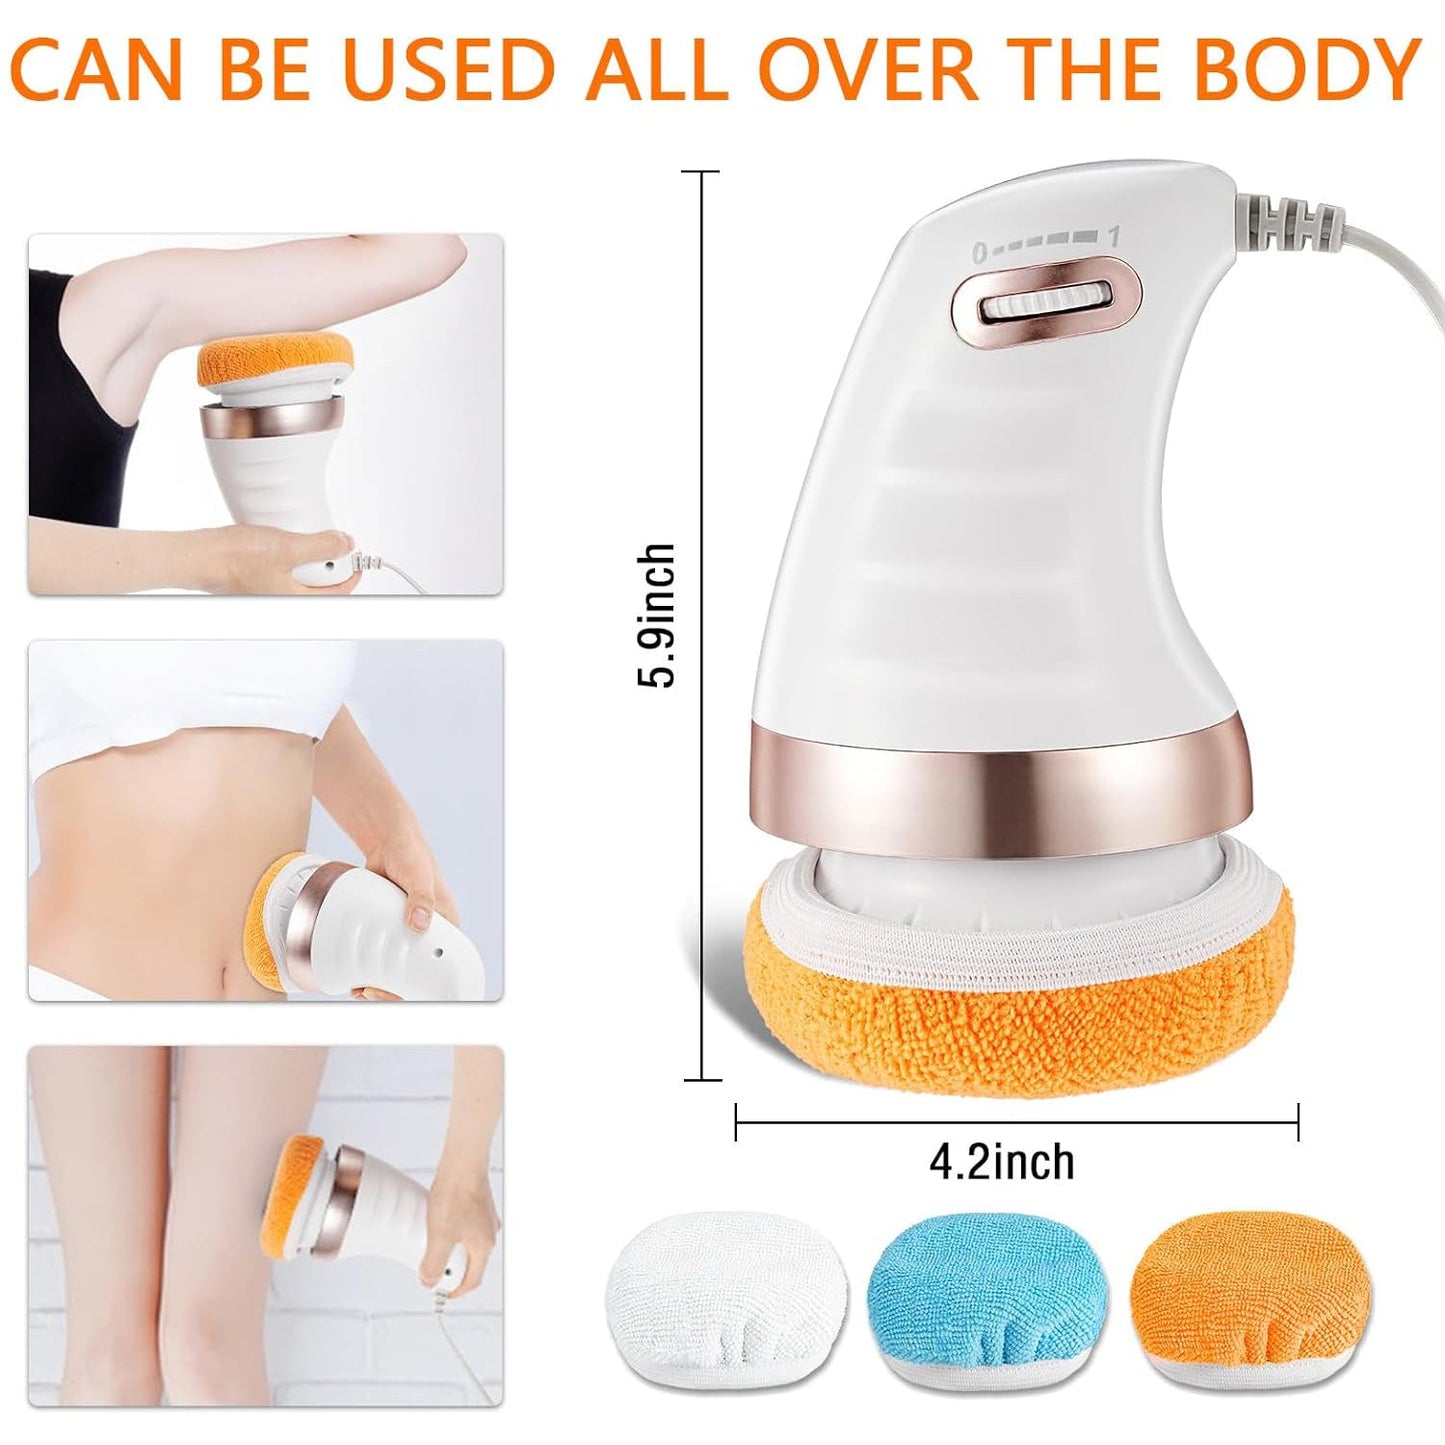 7293 Body Massager Shaping Machine | Body Sculpting Massager with 3 Washable Pads |Adjustable Speeds | Electric Handheld Massager for Belly, Waist, Legs, Arms, Butt (1 Pc)